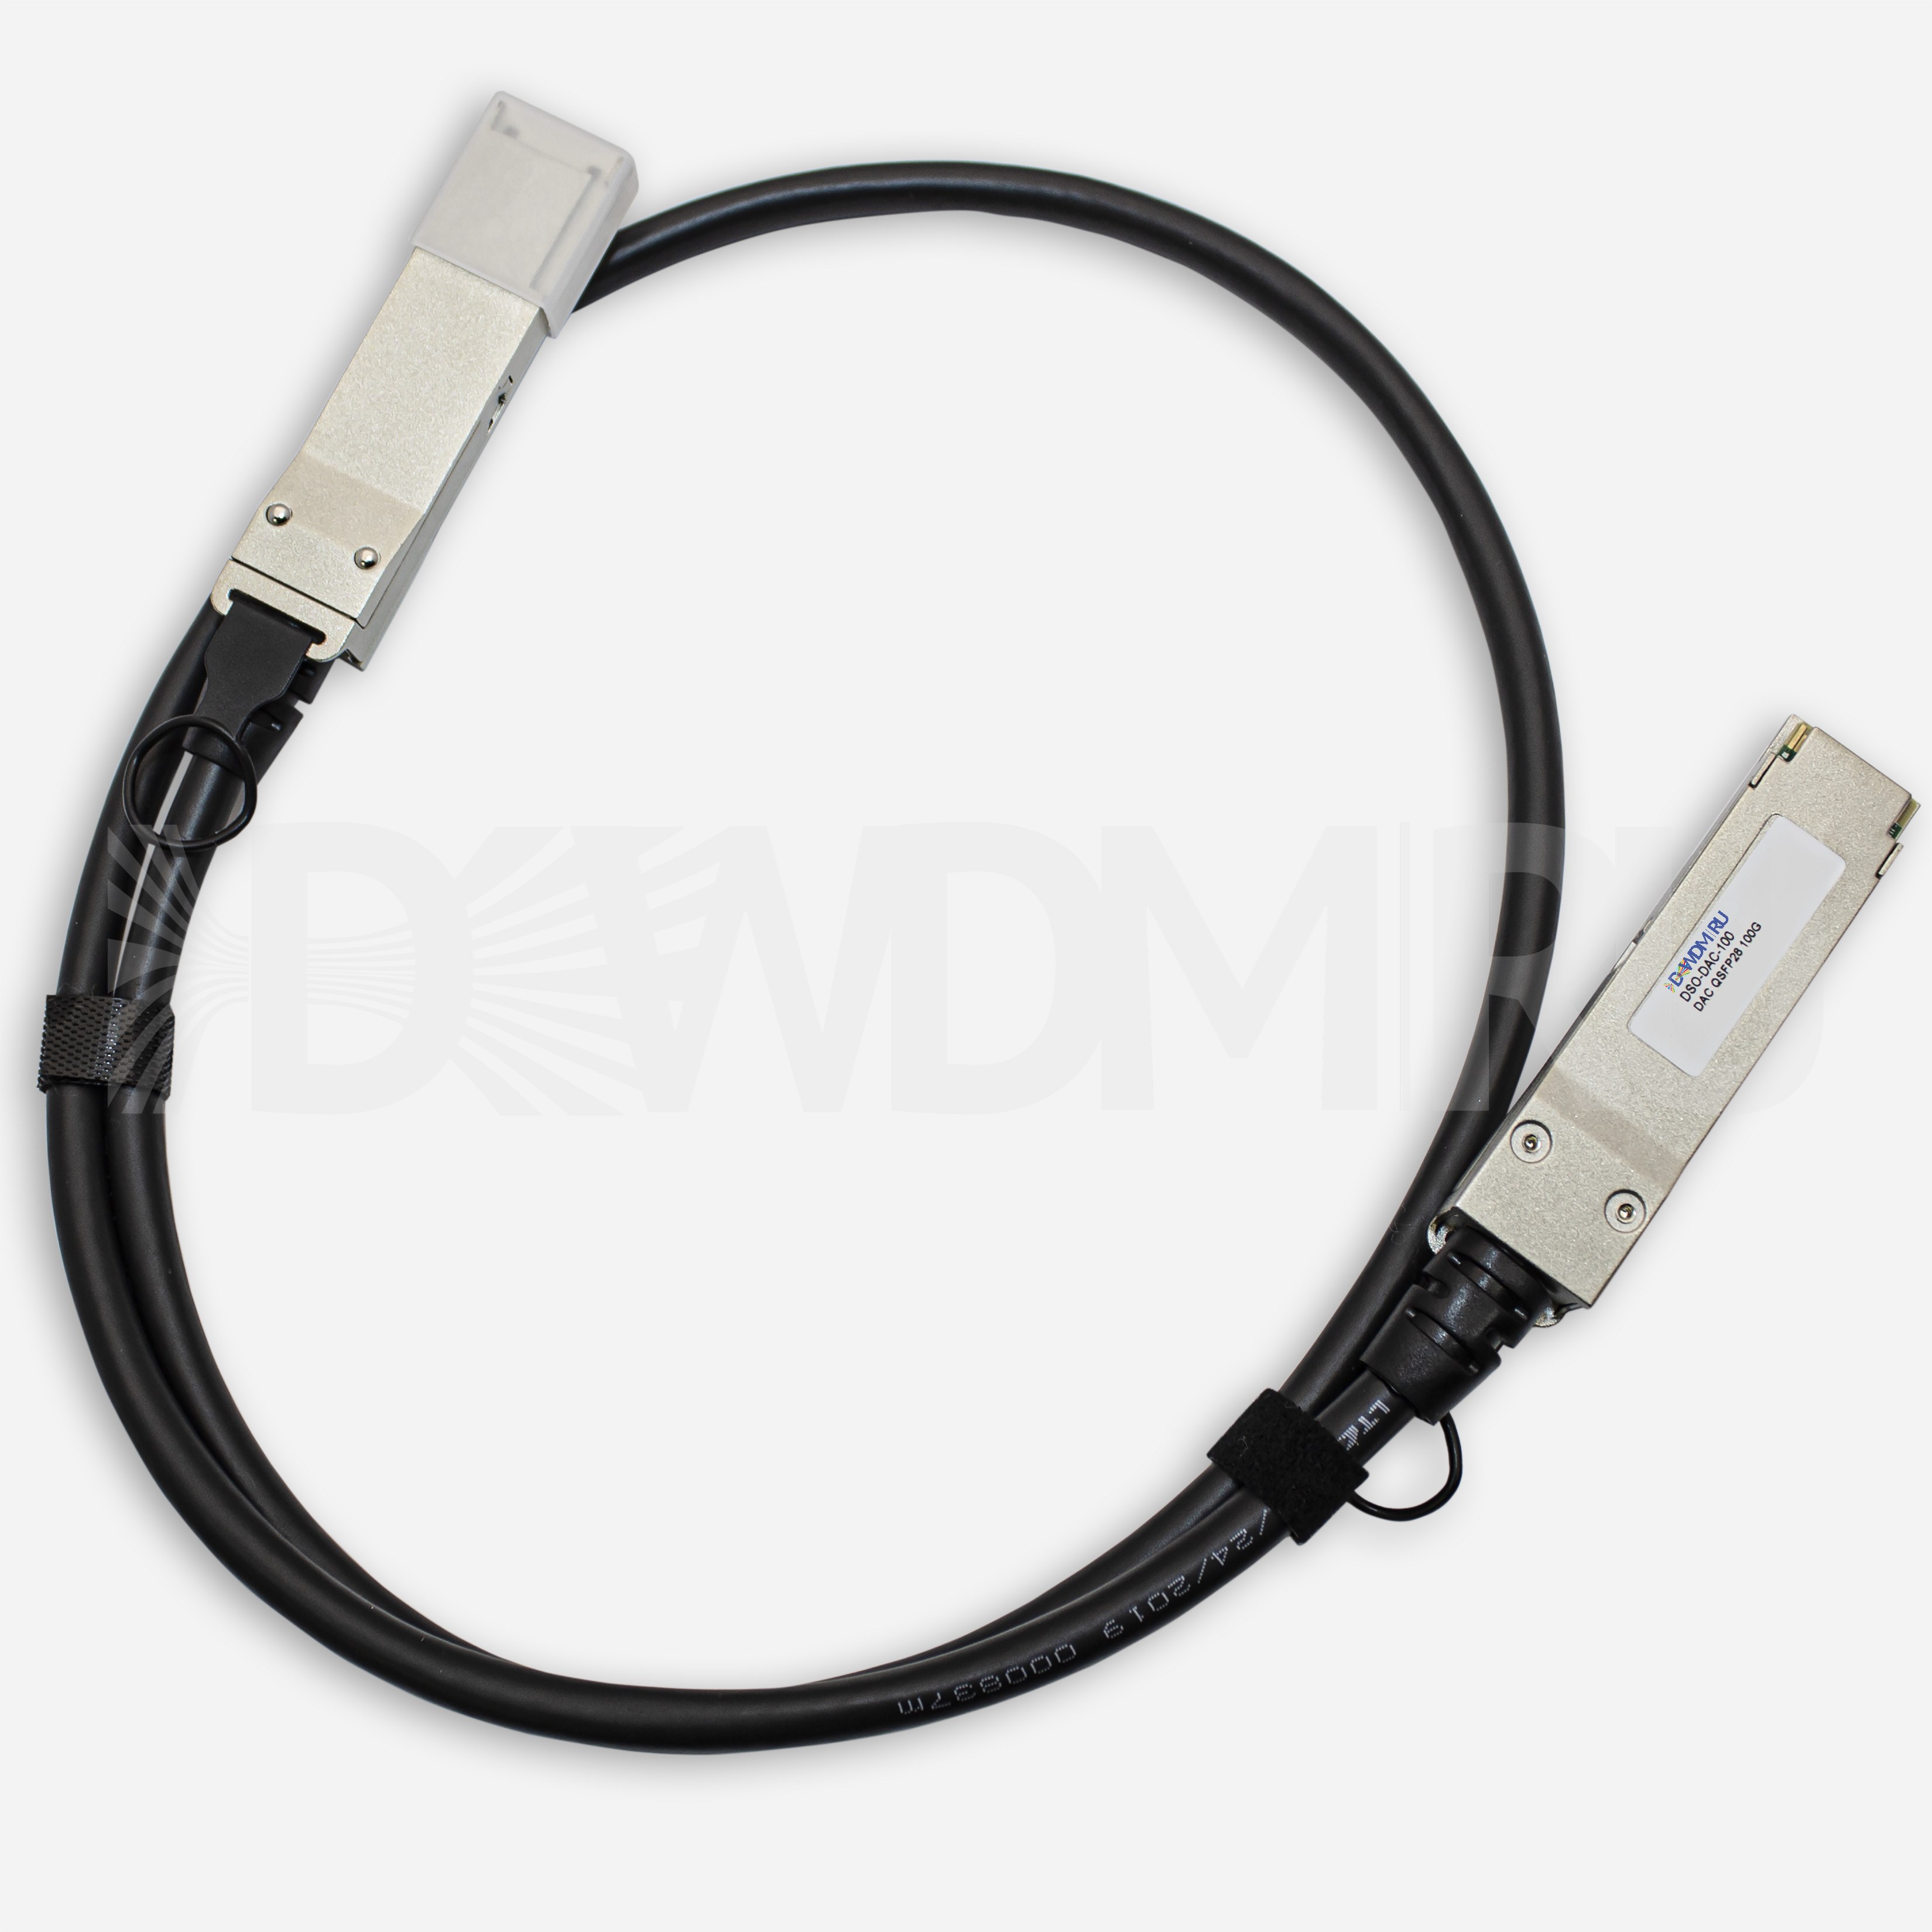 Кабель Direct Attached, QSFP28, 100 Гб/с, 3 м - ДВДМ.РУ (DSO-DAC-100-5)